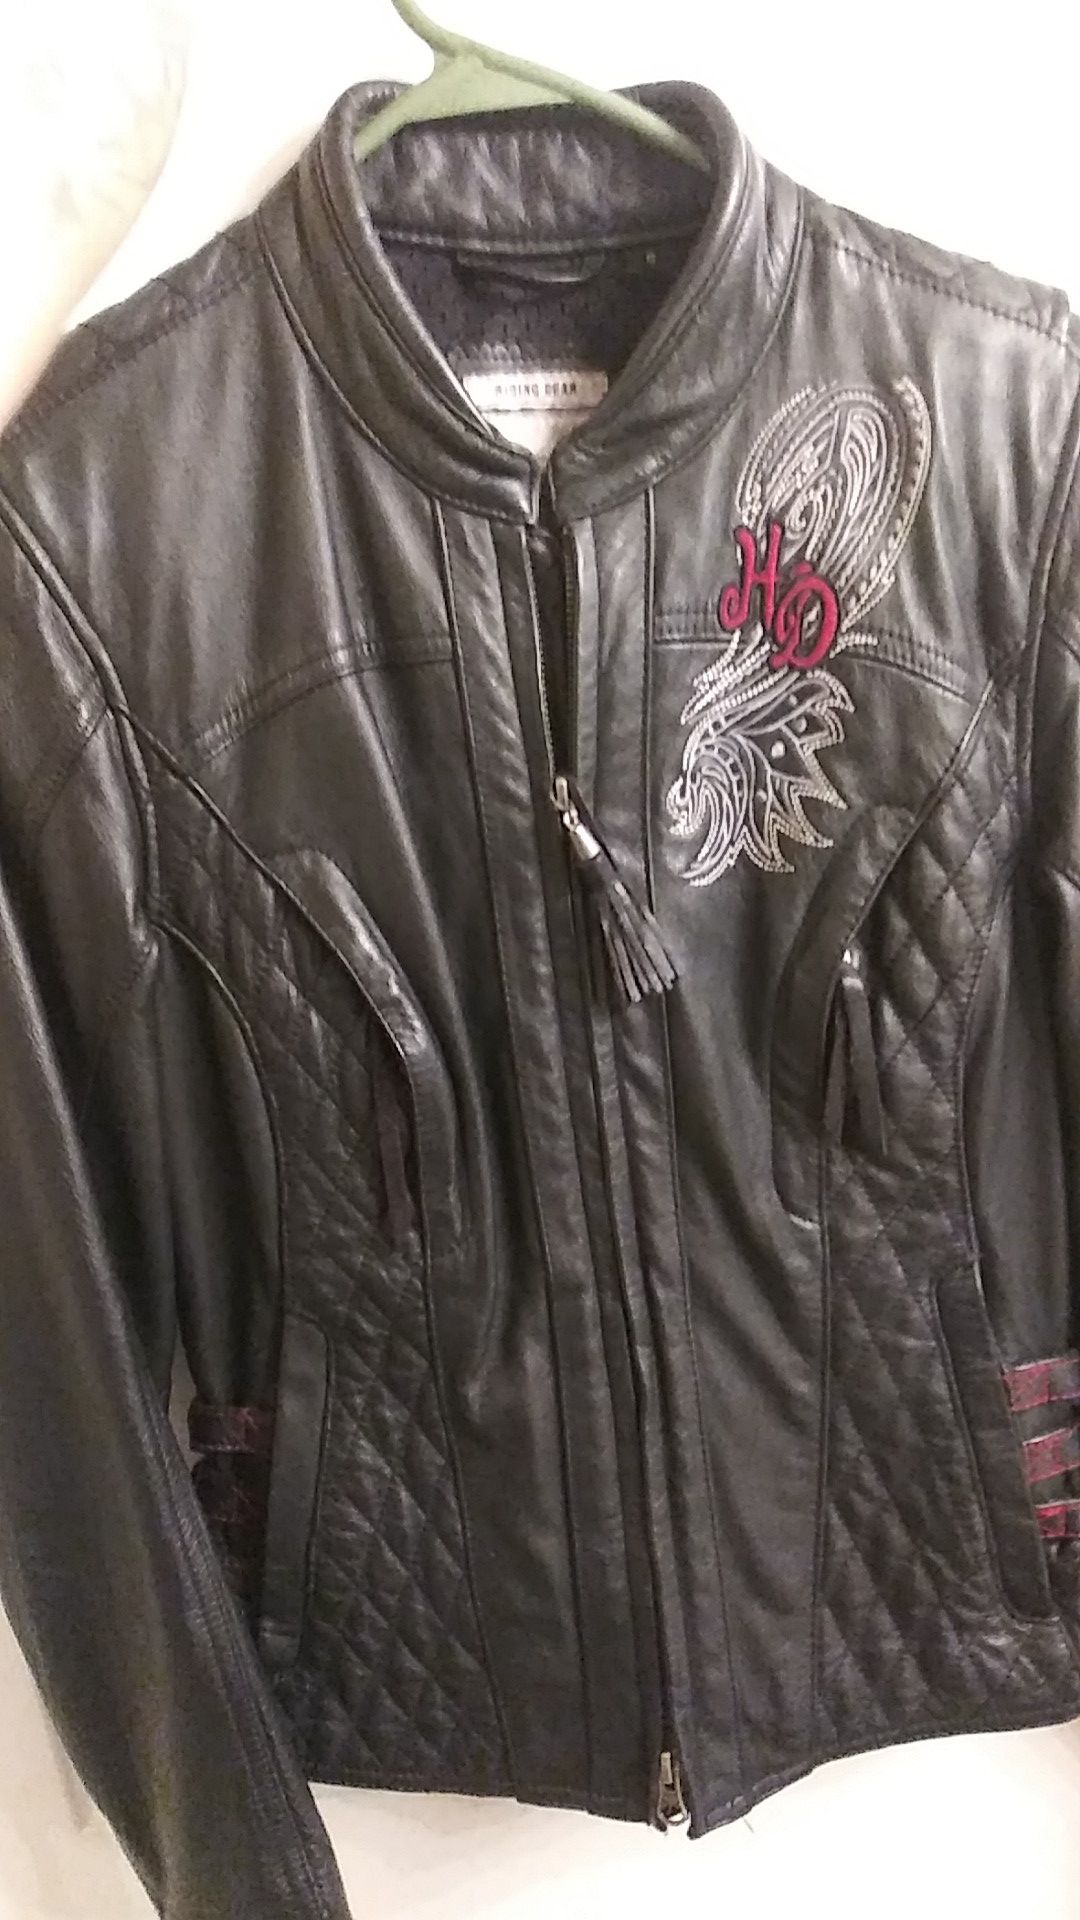 Harley Davidson Leather Riding Jacket size Small Woman's